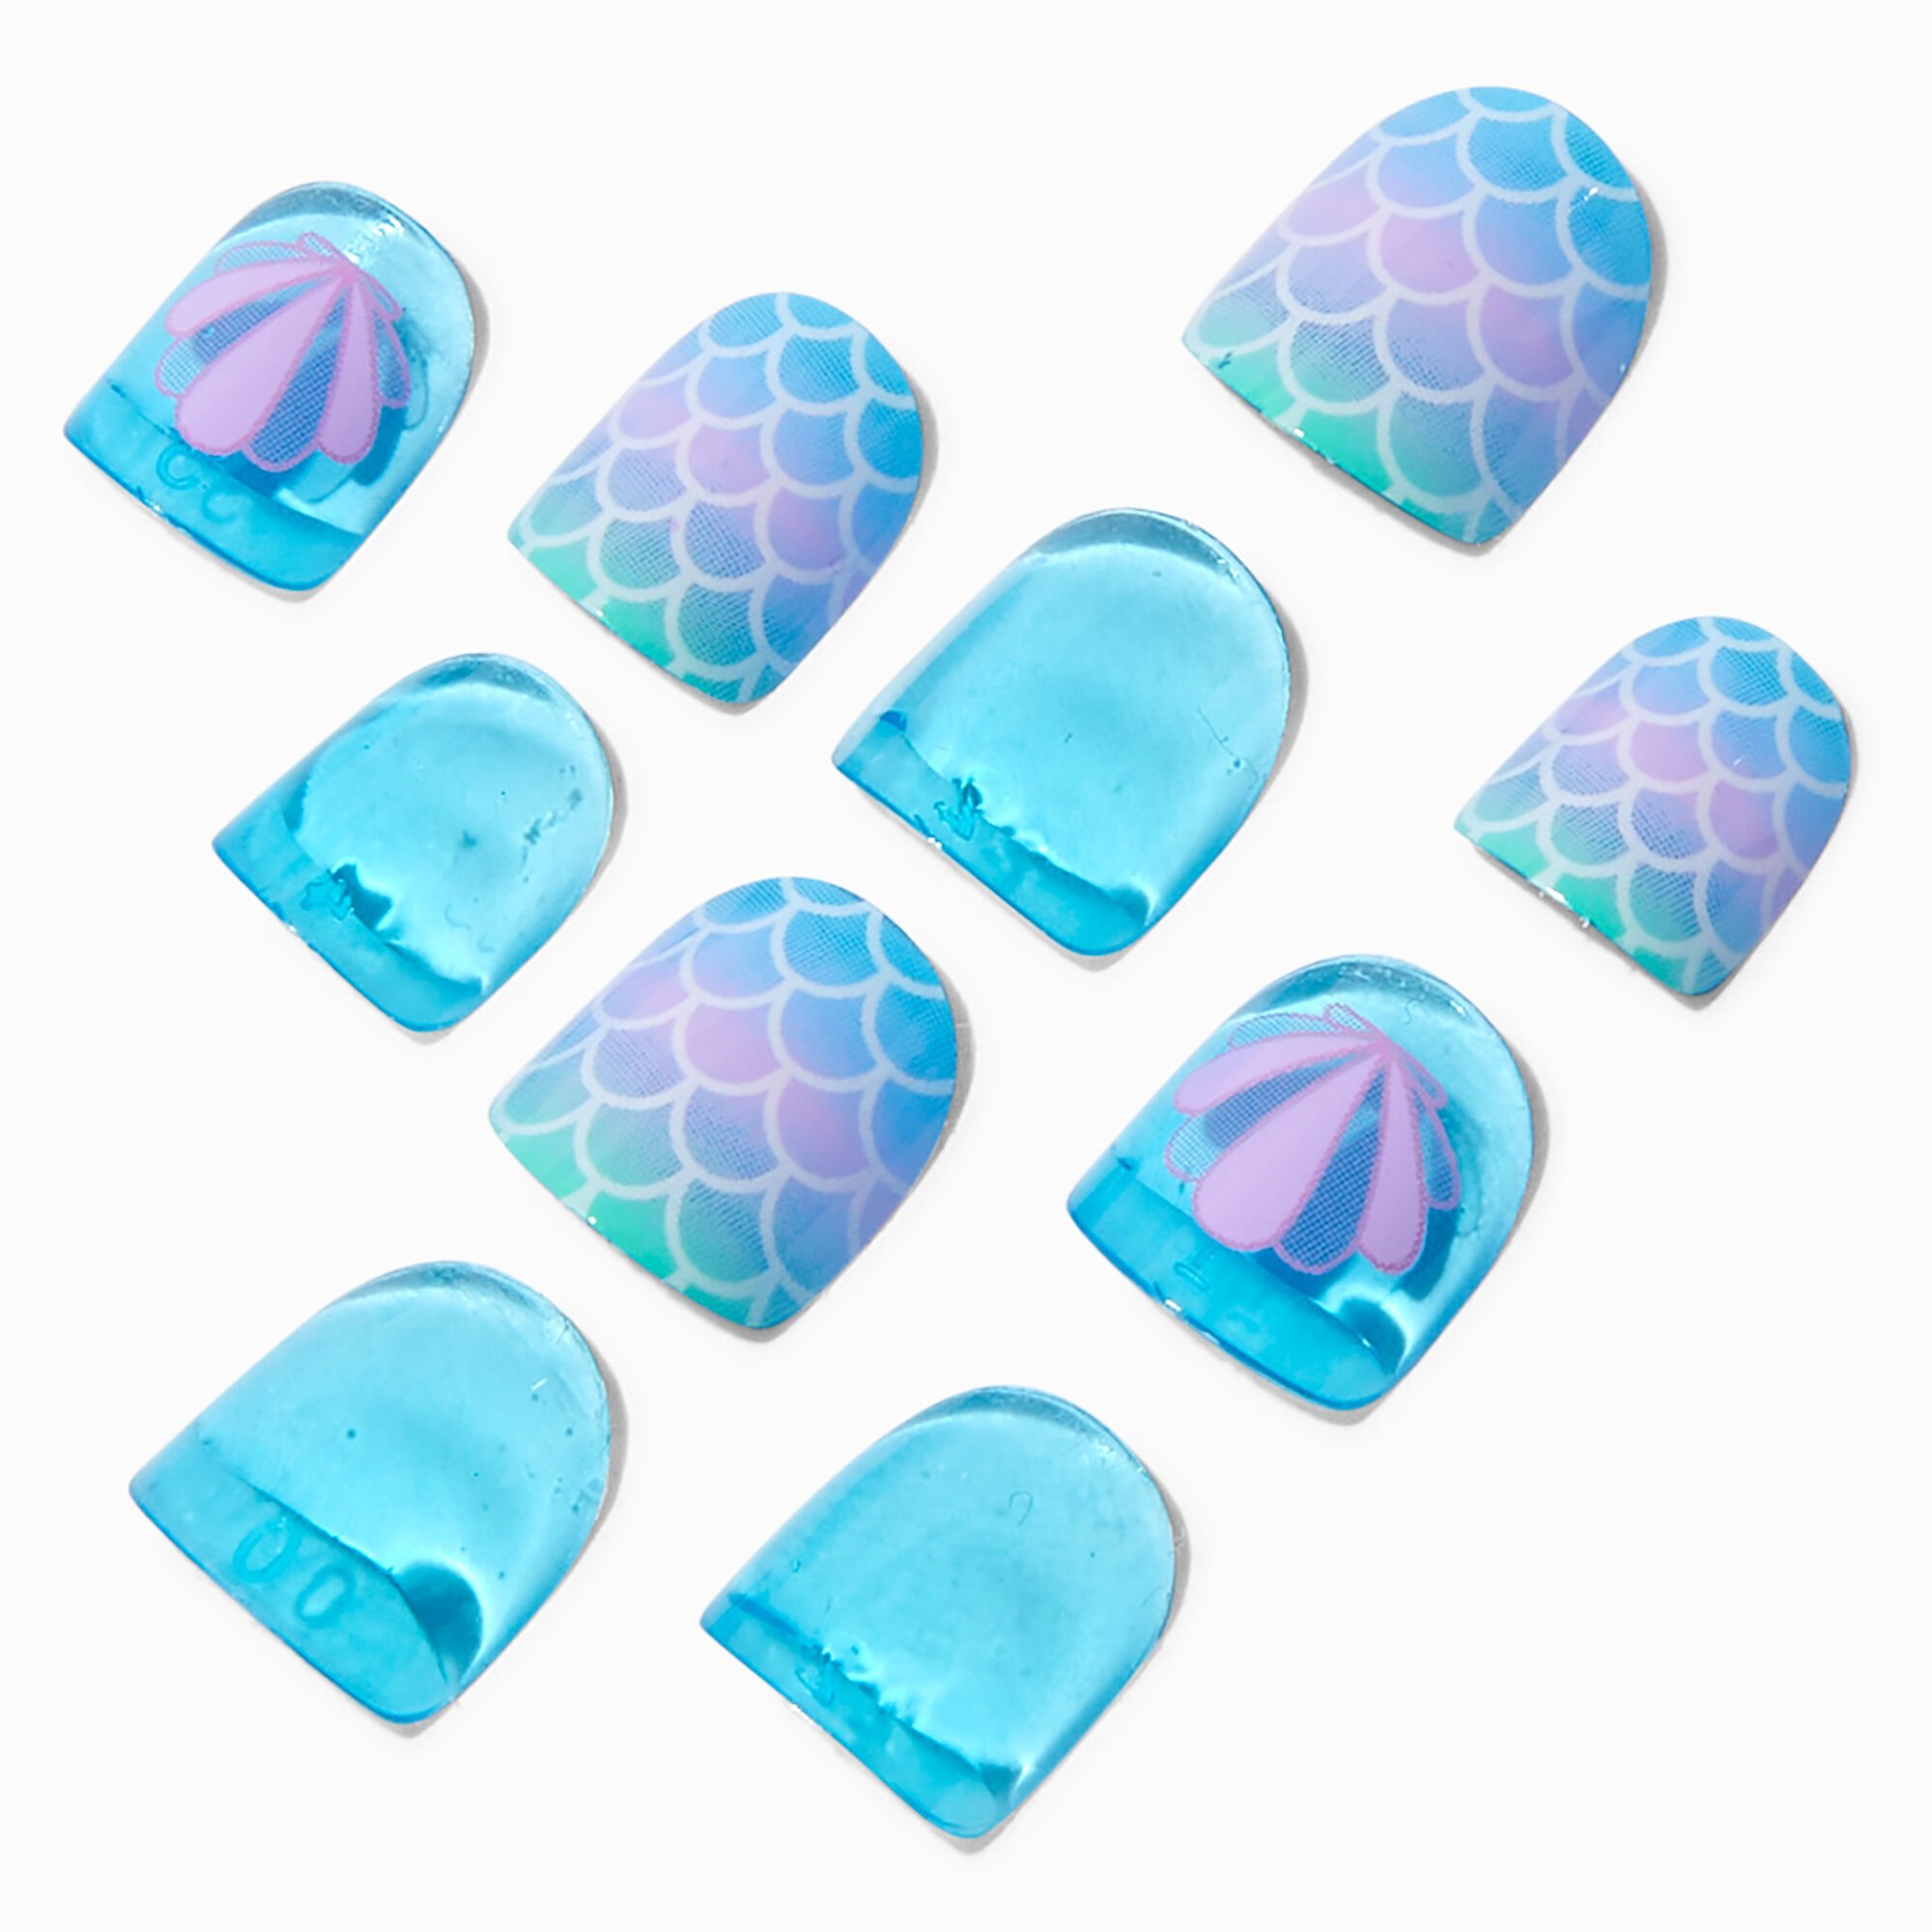 View Claires Club Mermaid Press On Vegan Faux Nail Set 10 Pack information